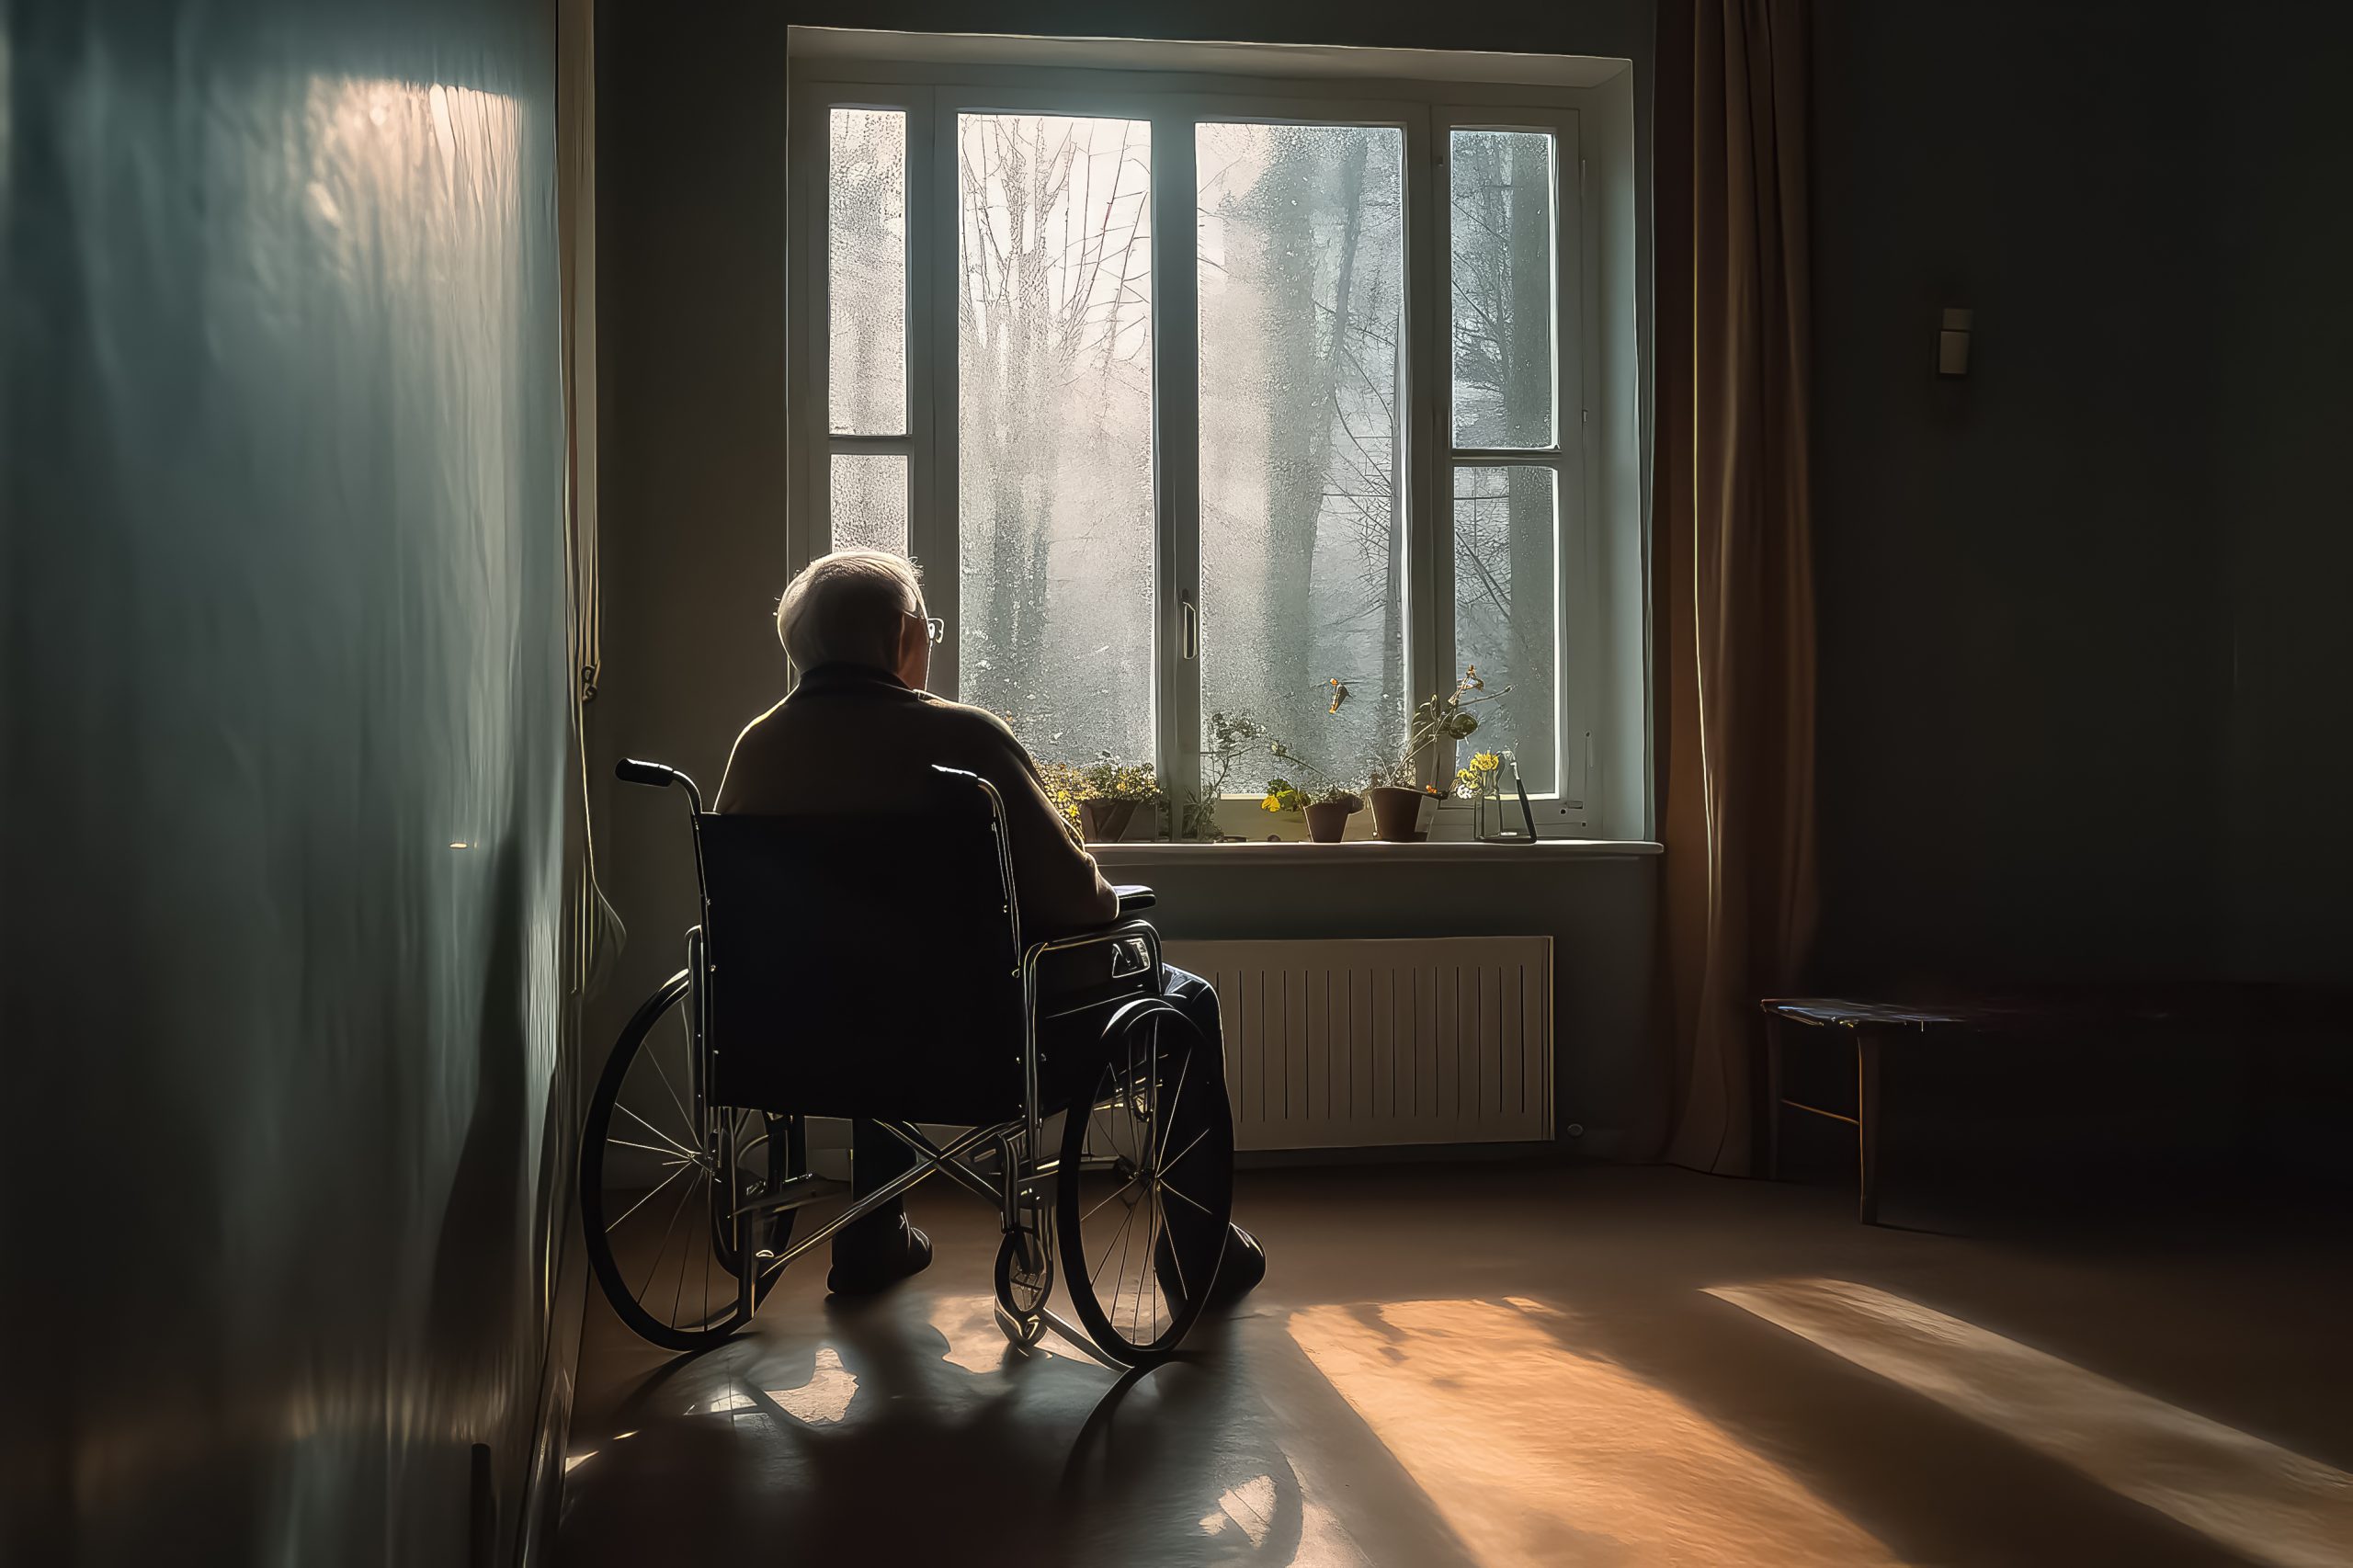 The image portrays a peaceful scene of an elderly person sitting in a wheelchair, gazing out of a large window that reveals a view of bare trees and a misty atmosphere, suggesting a cold or frosty day. The room is filled with a warm, natural light that casts soft shadows across the floor, creating a contemplative ambiance. On the windowsill, there are several small flowering plants, adding a splash of colour and life to the serene interior. The overall atmosphere is quiet and still, evoking a sense of solitude and reflection.